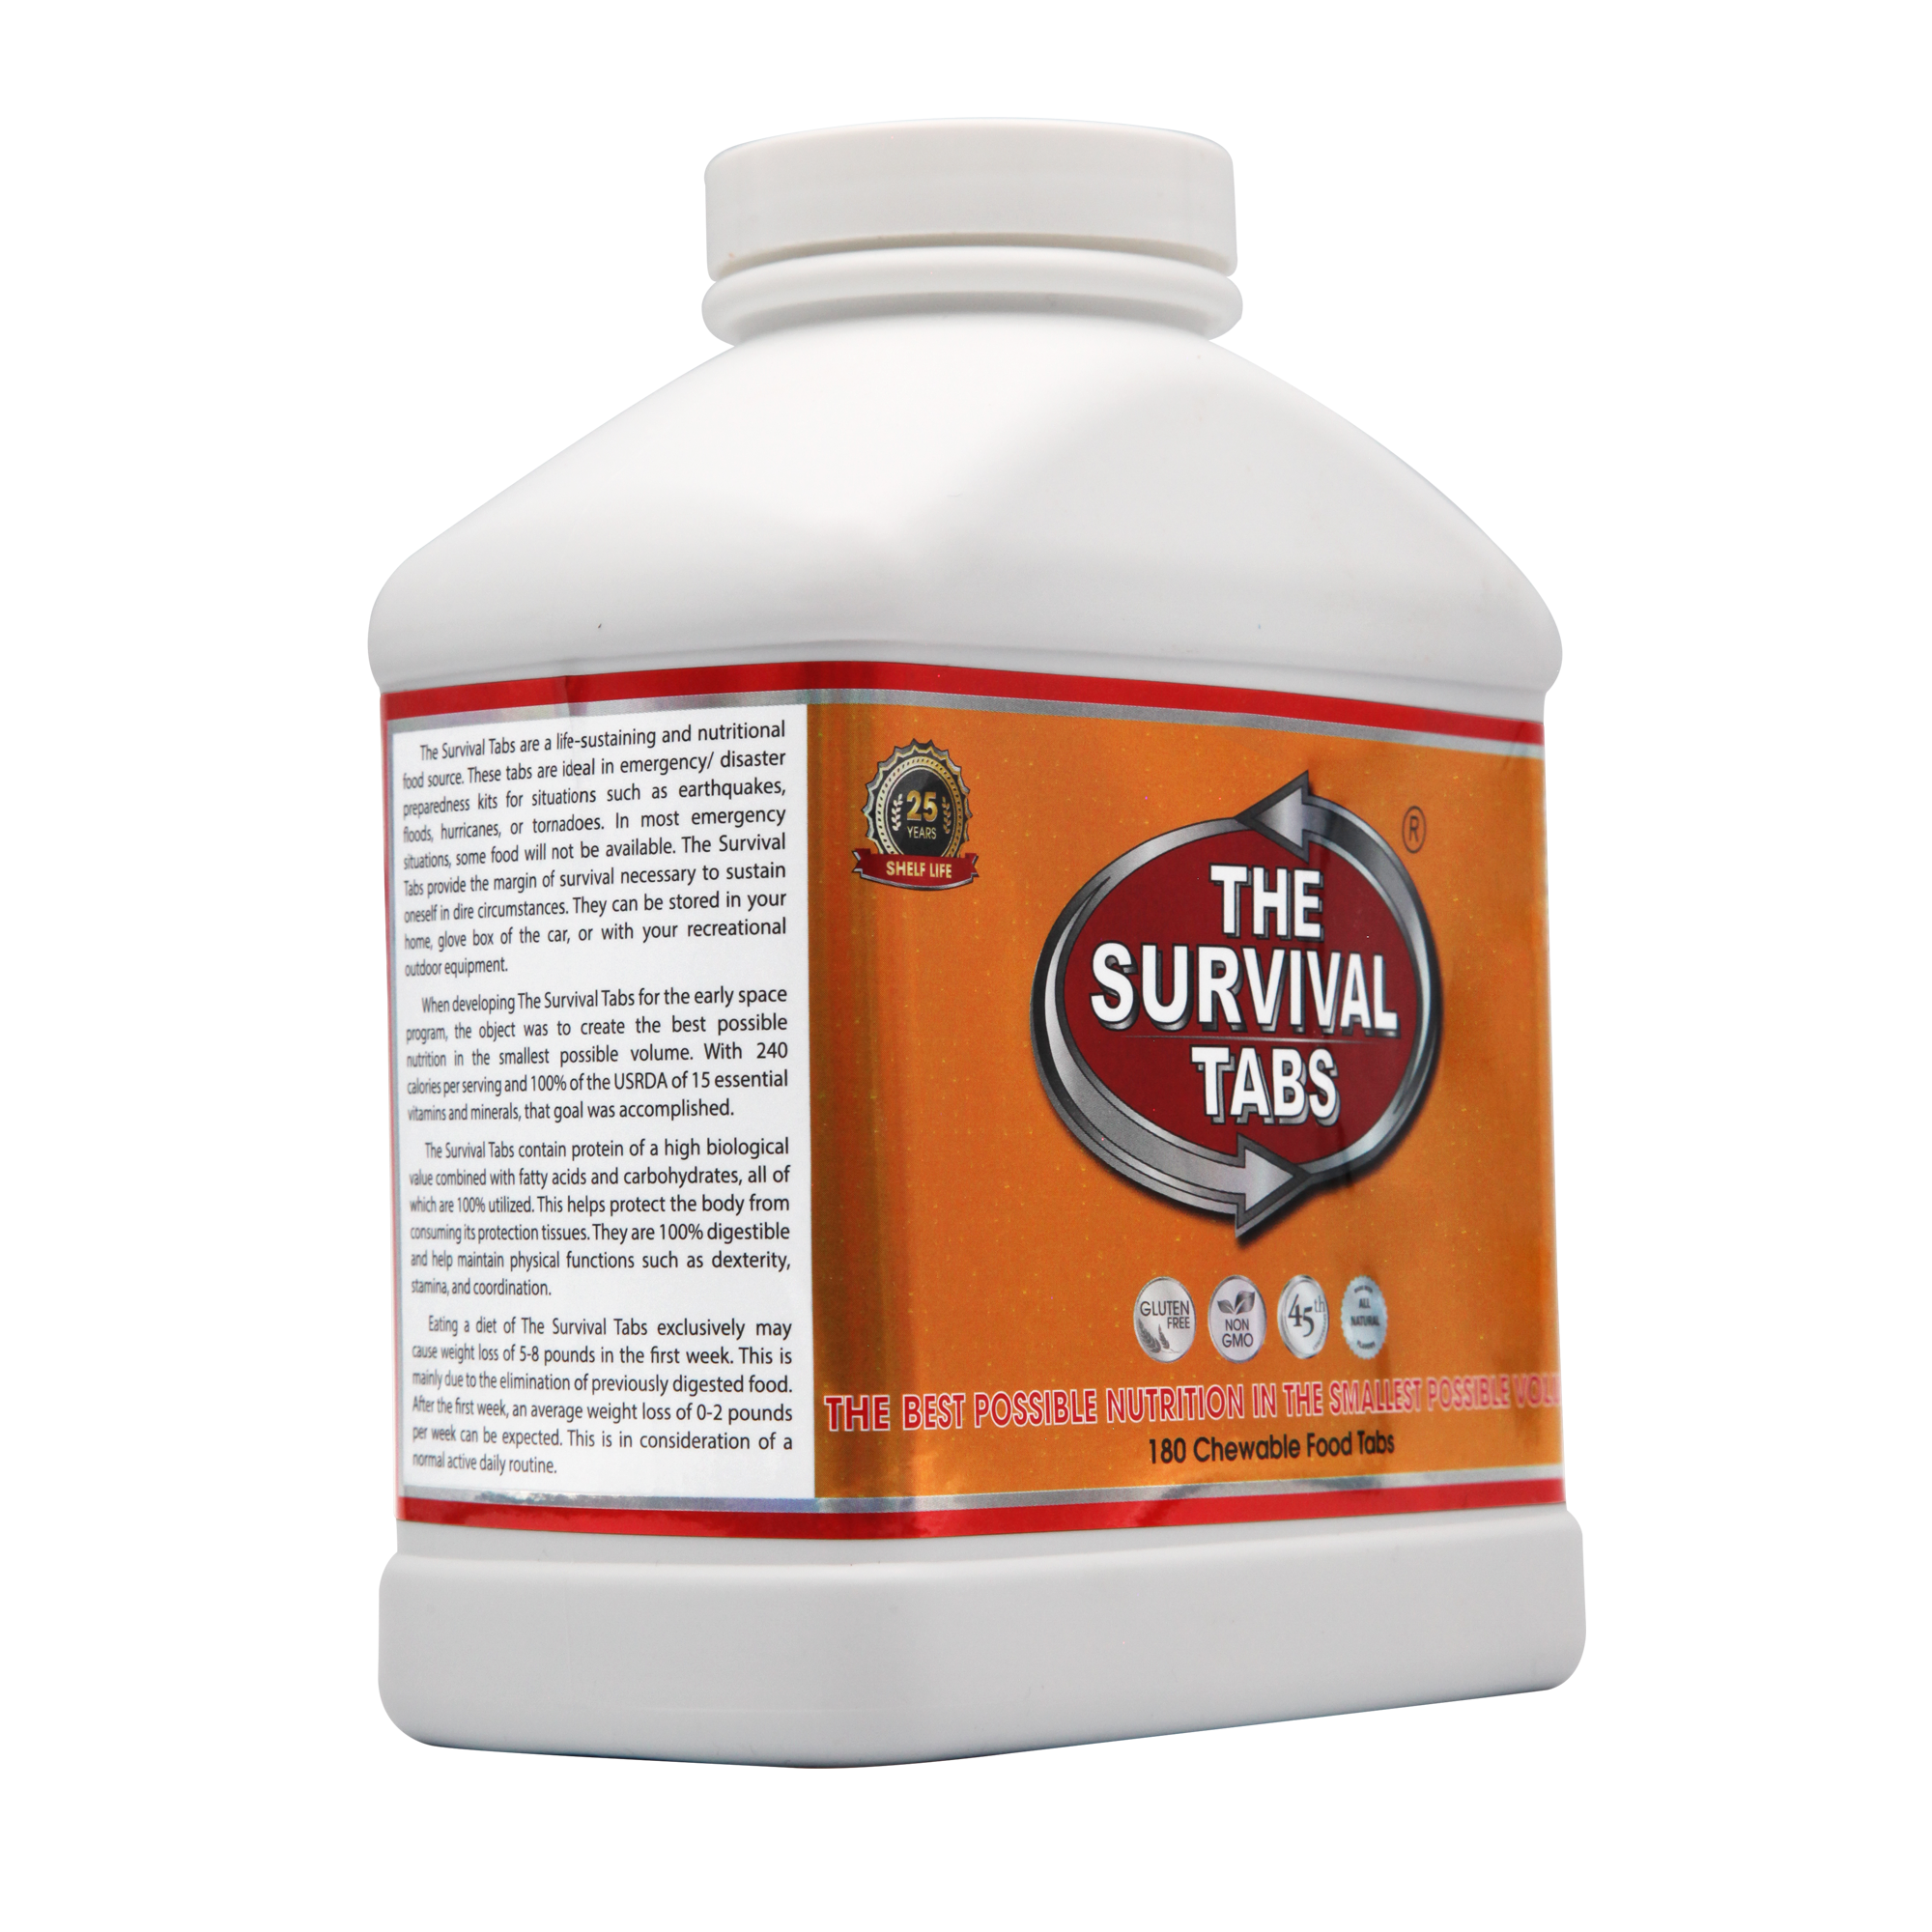 300 days Emergency Survival Food Disaster Preparedness Supply Gluten Free & Non-GMO 25 year shelf life No special storage Ready to eat 3600 protein tabs